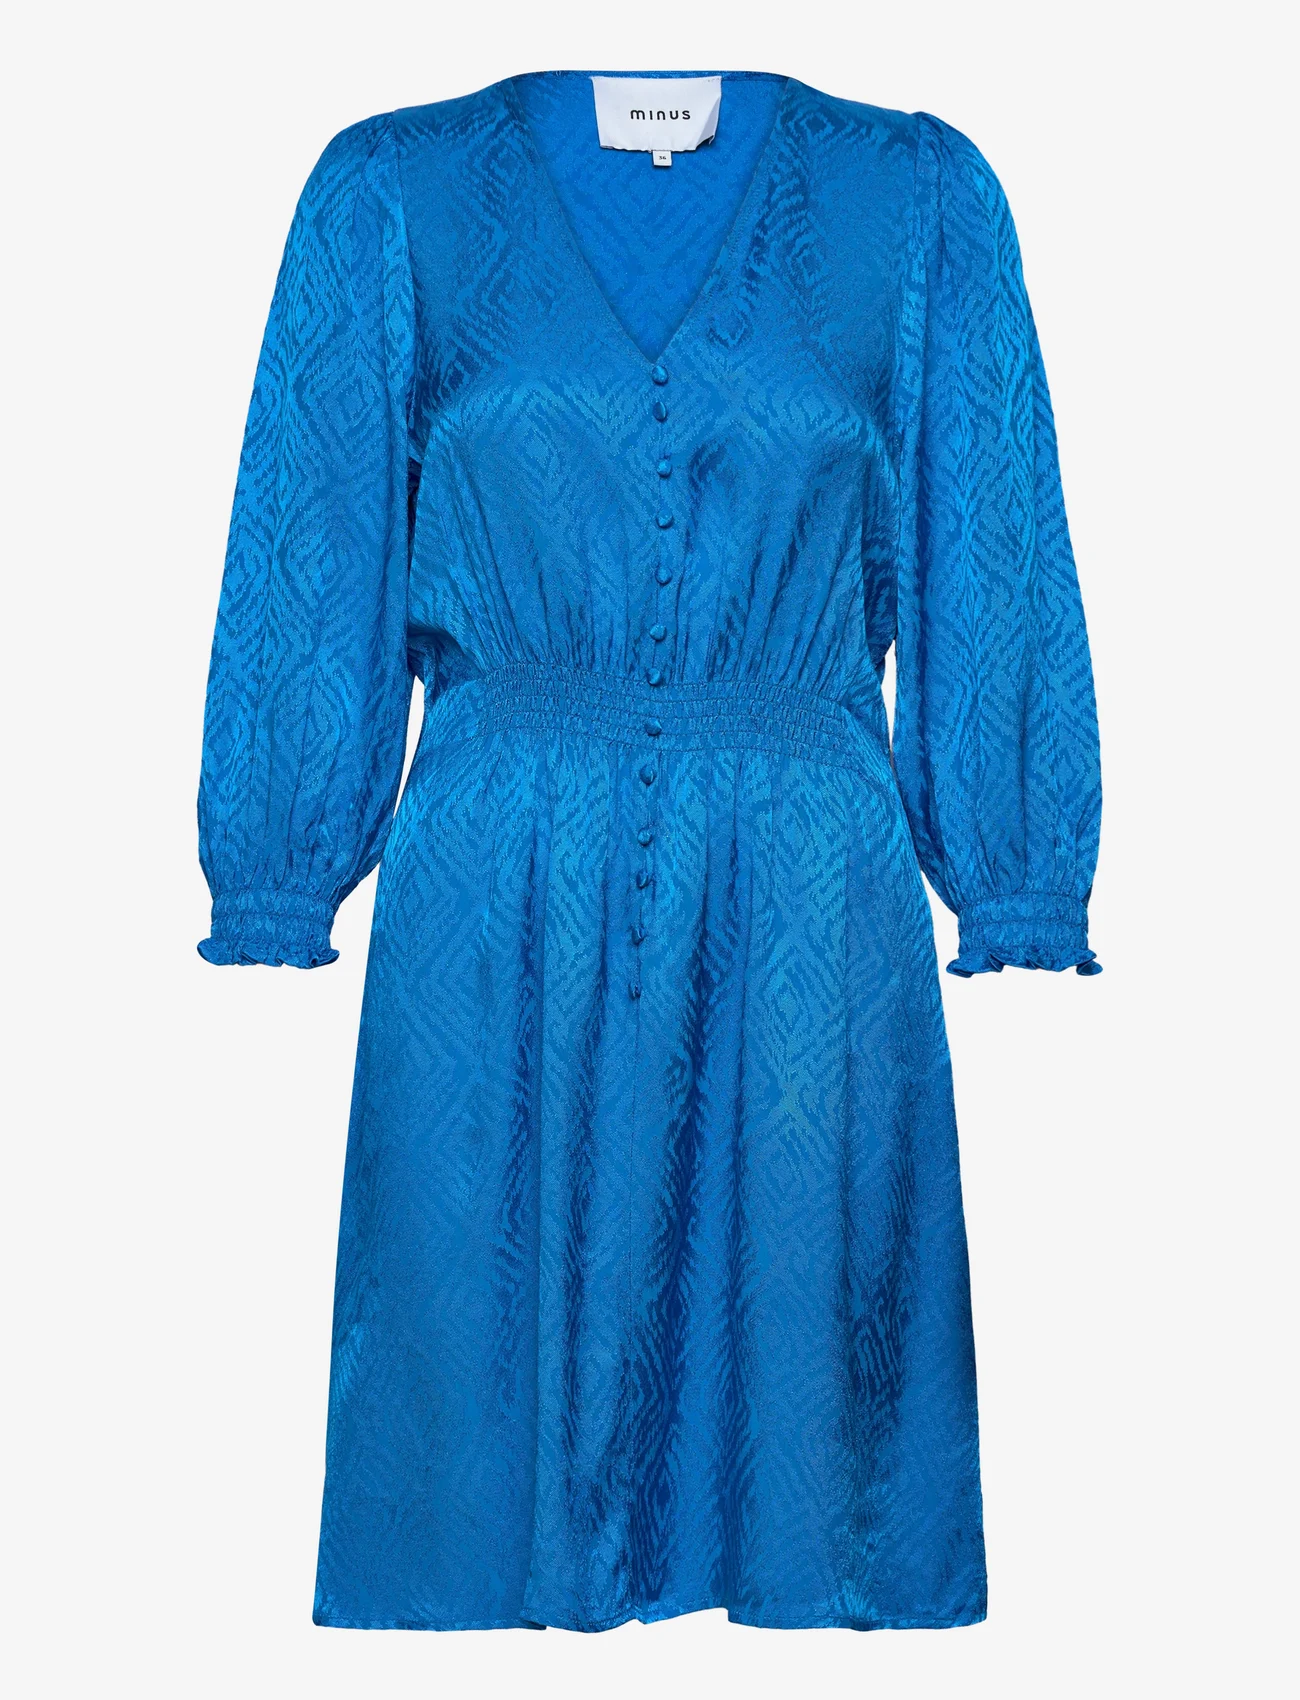 Minus - Lucia Kort Kjole - party wear at outlet prices - ocean blue - 0